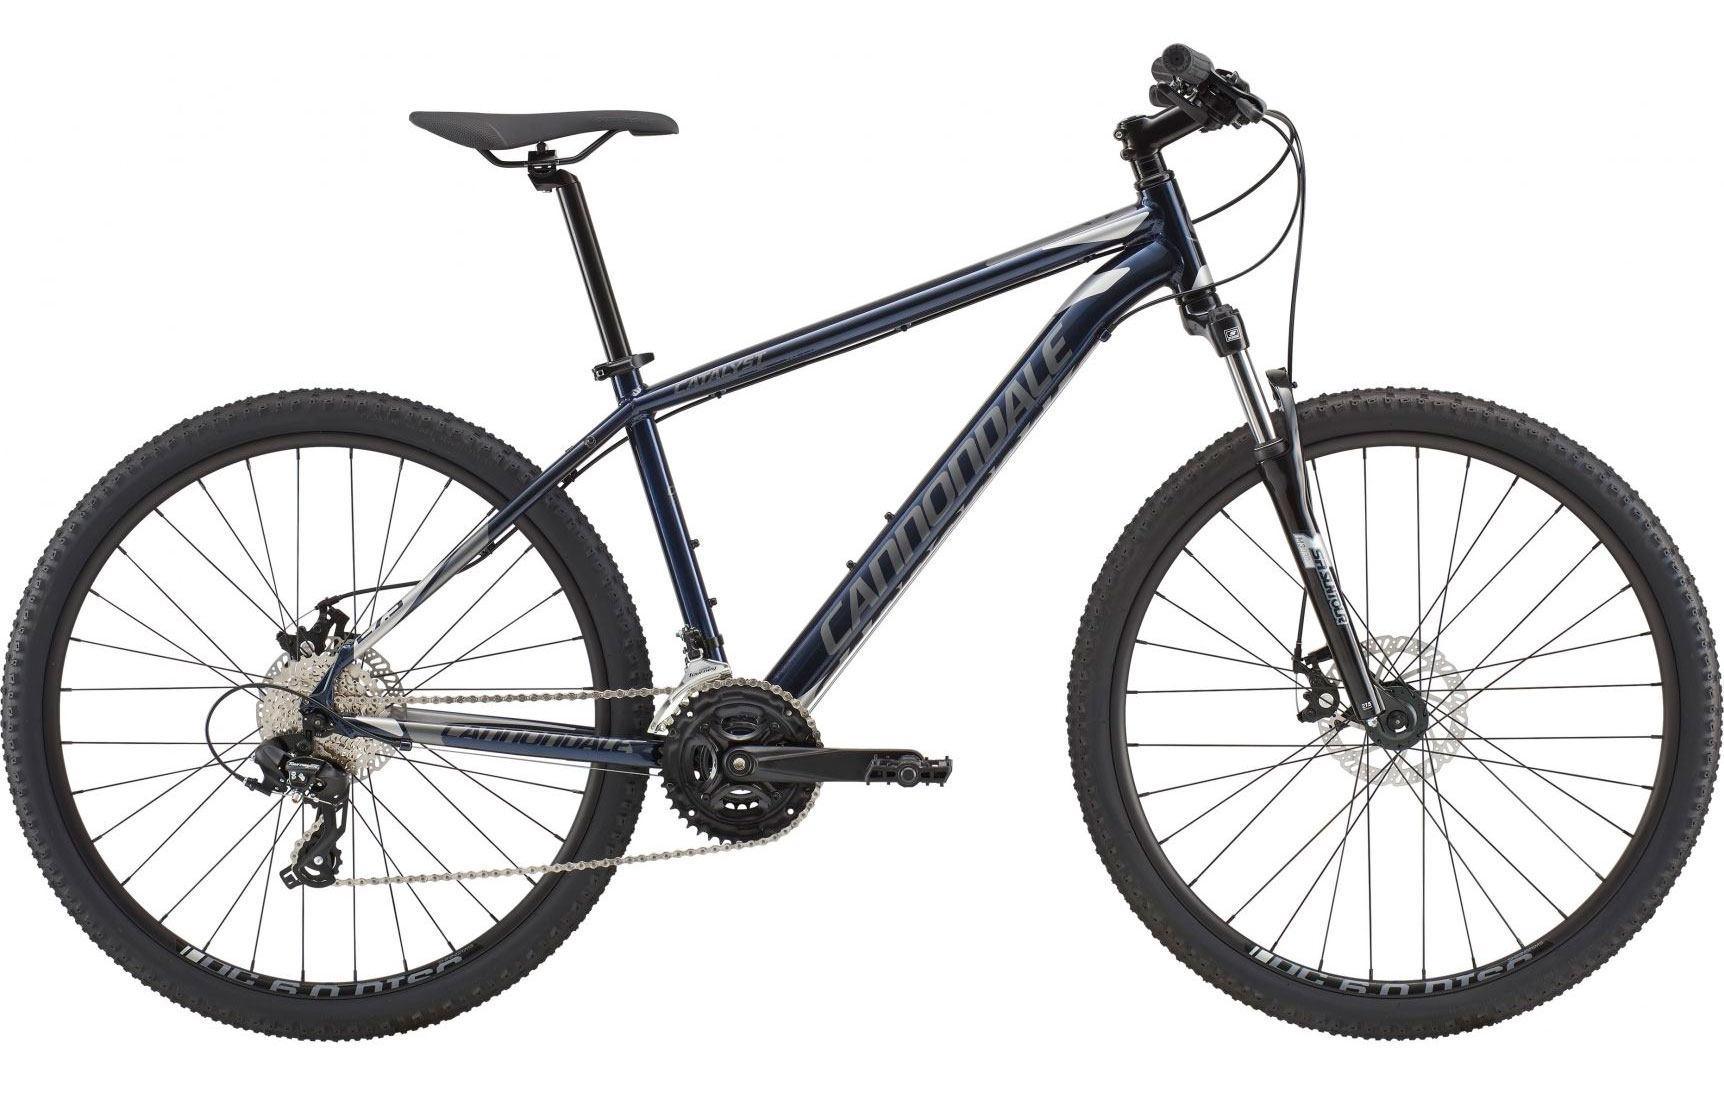 Велосипед 27,5" Cannondale CATALYST 3 рама - L 2018 MDN фото 